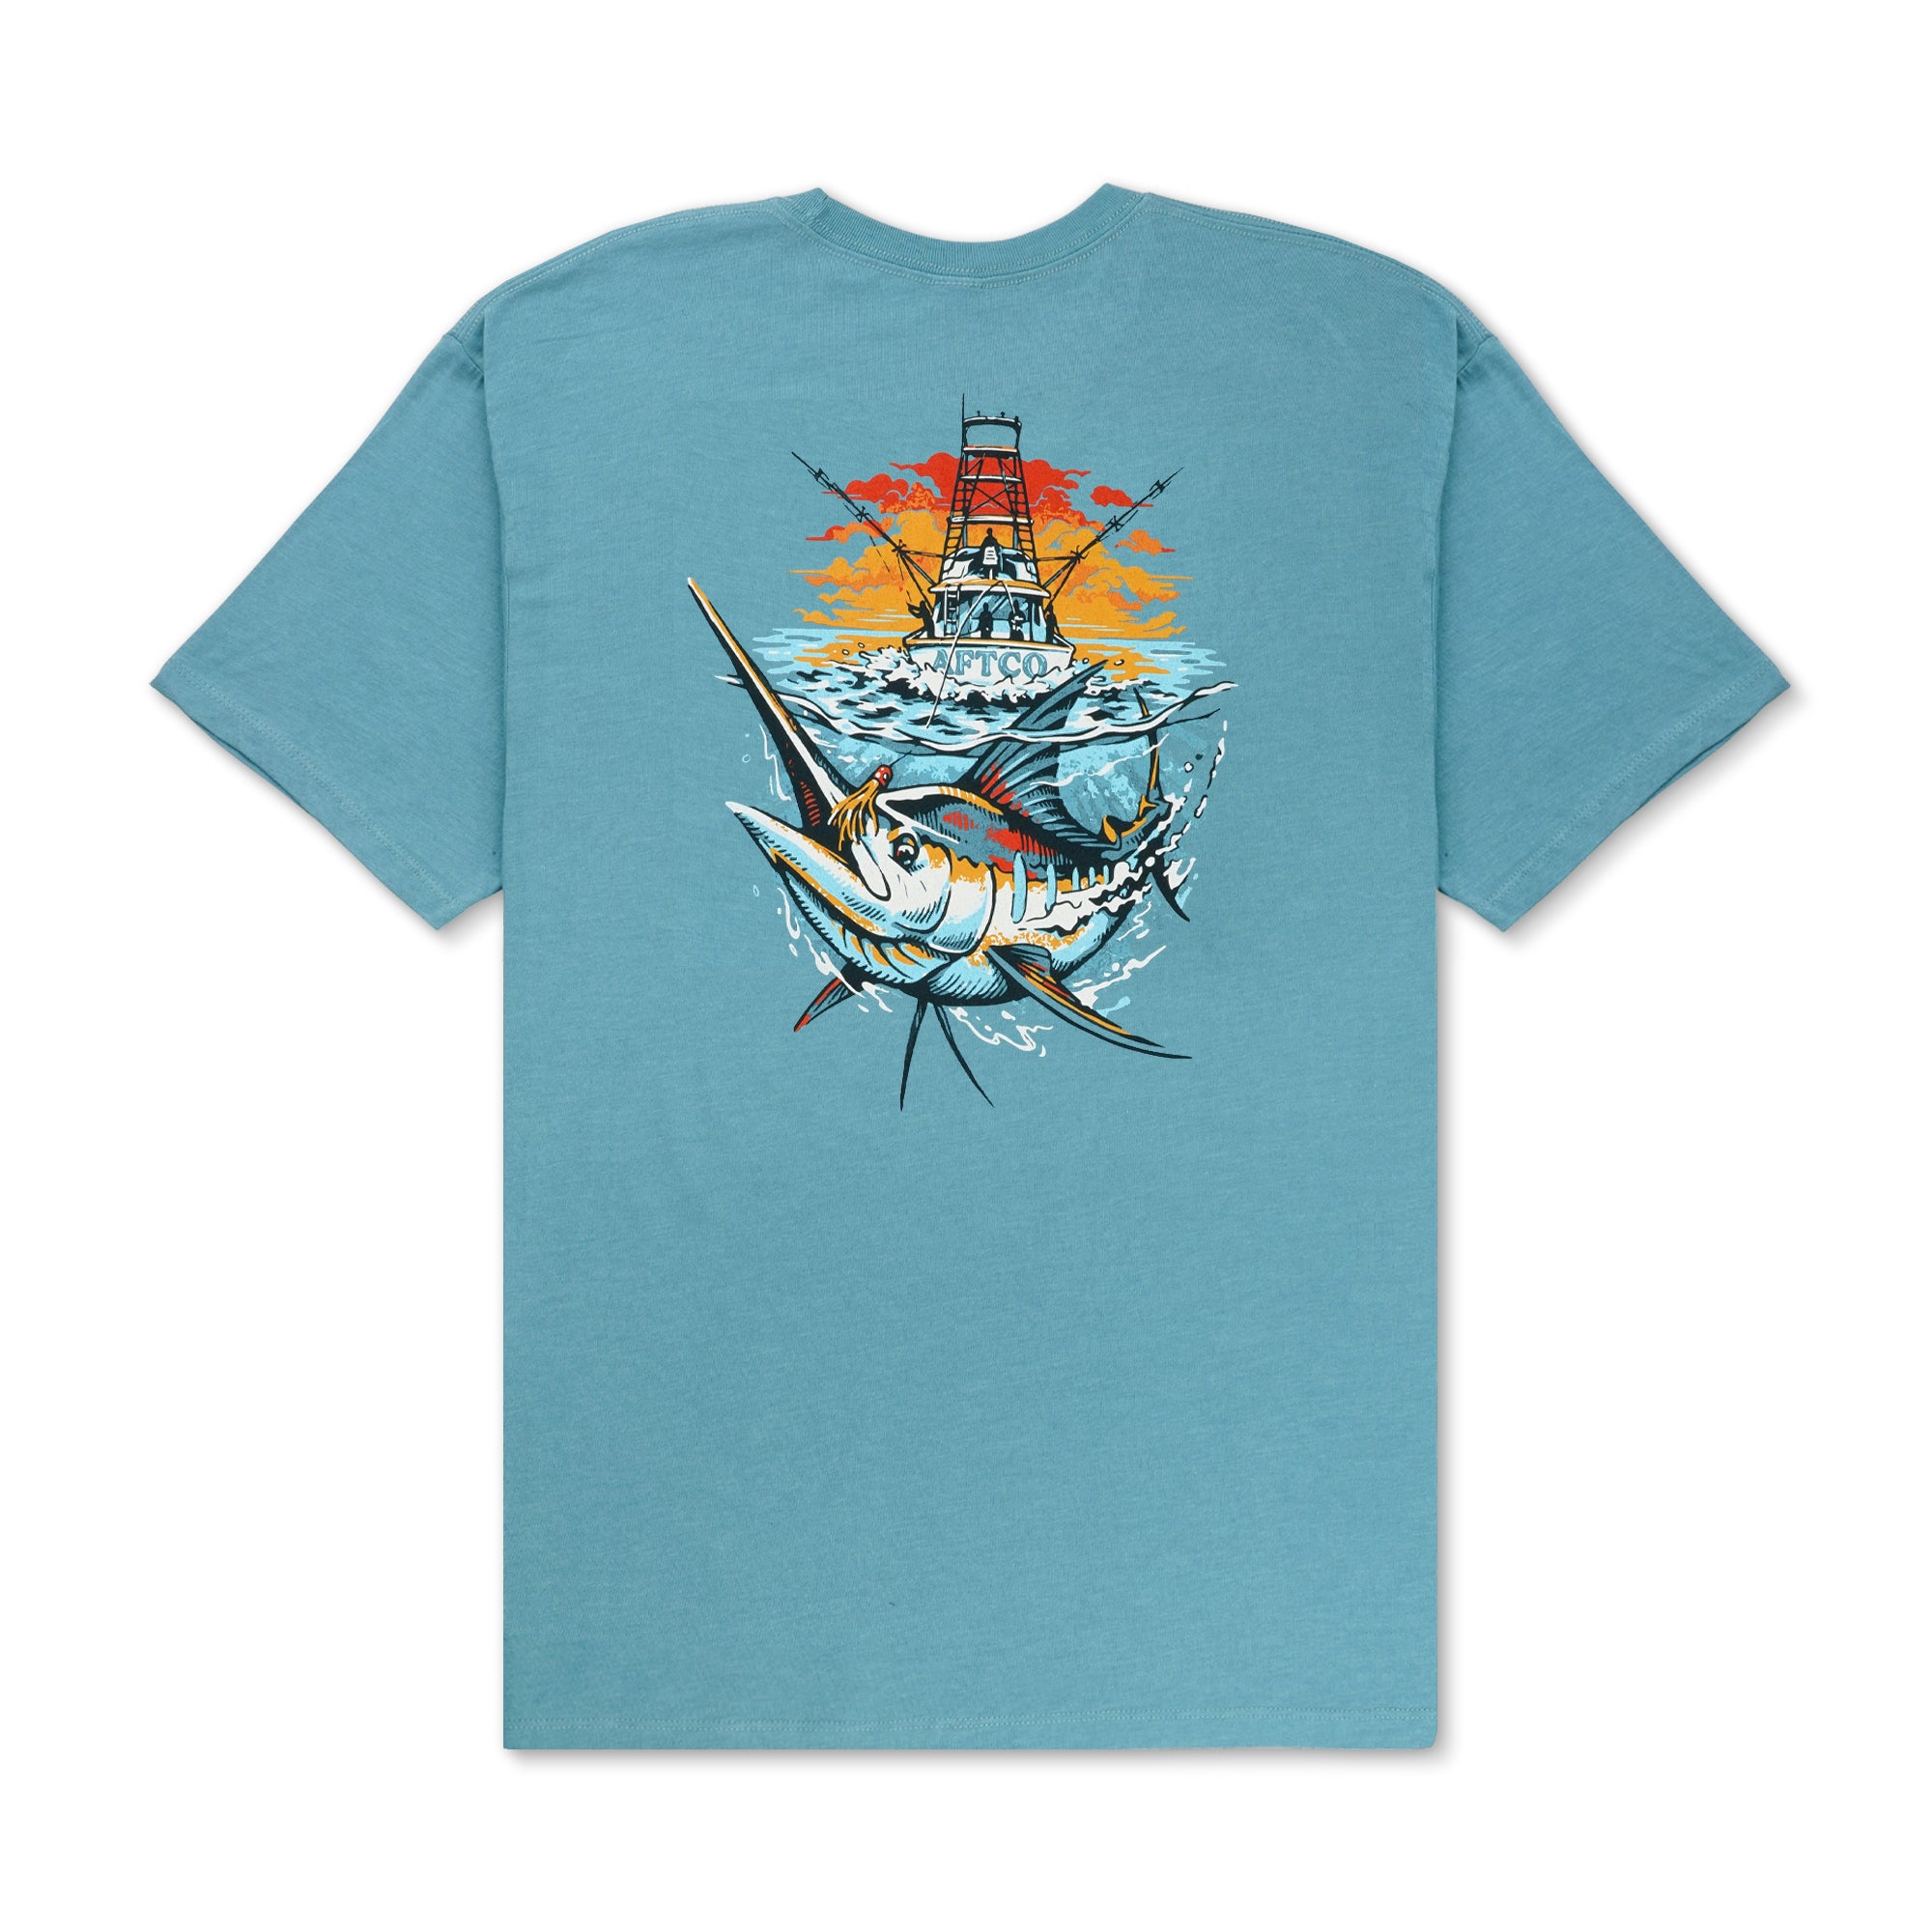 AFTCO RELEASE SS T-SHIRT MENS